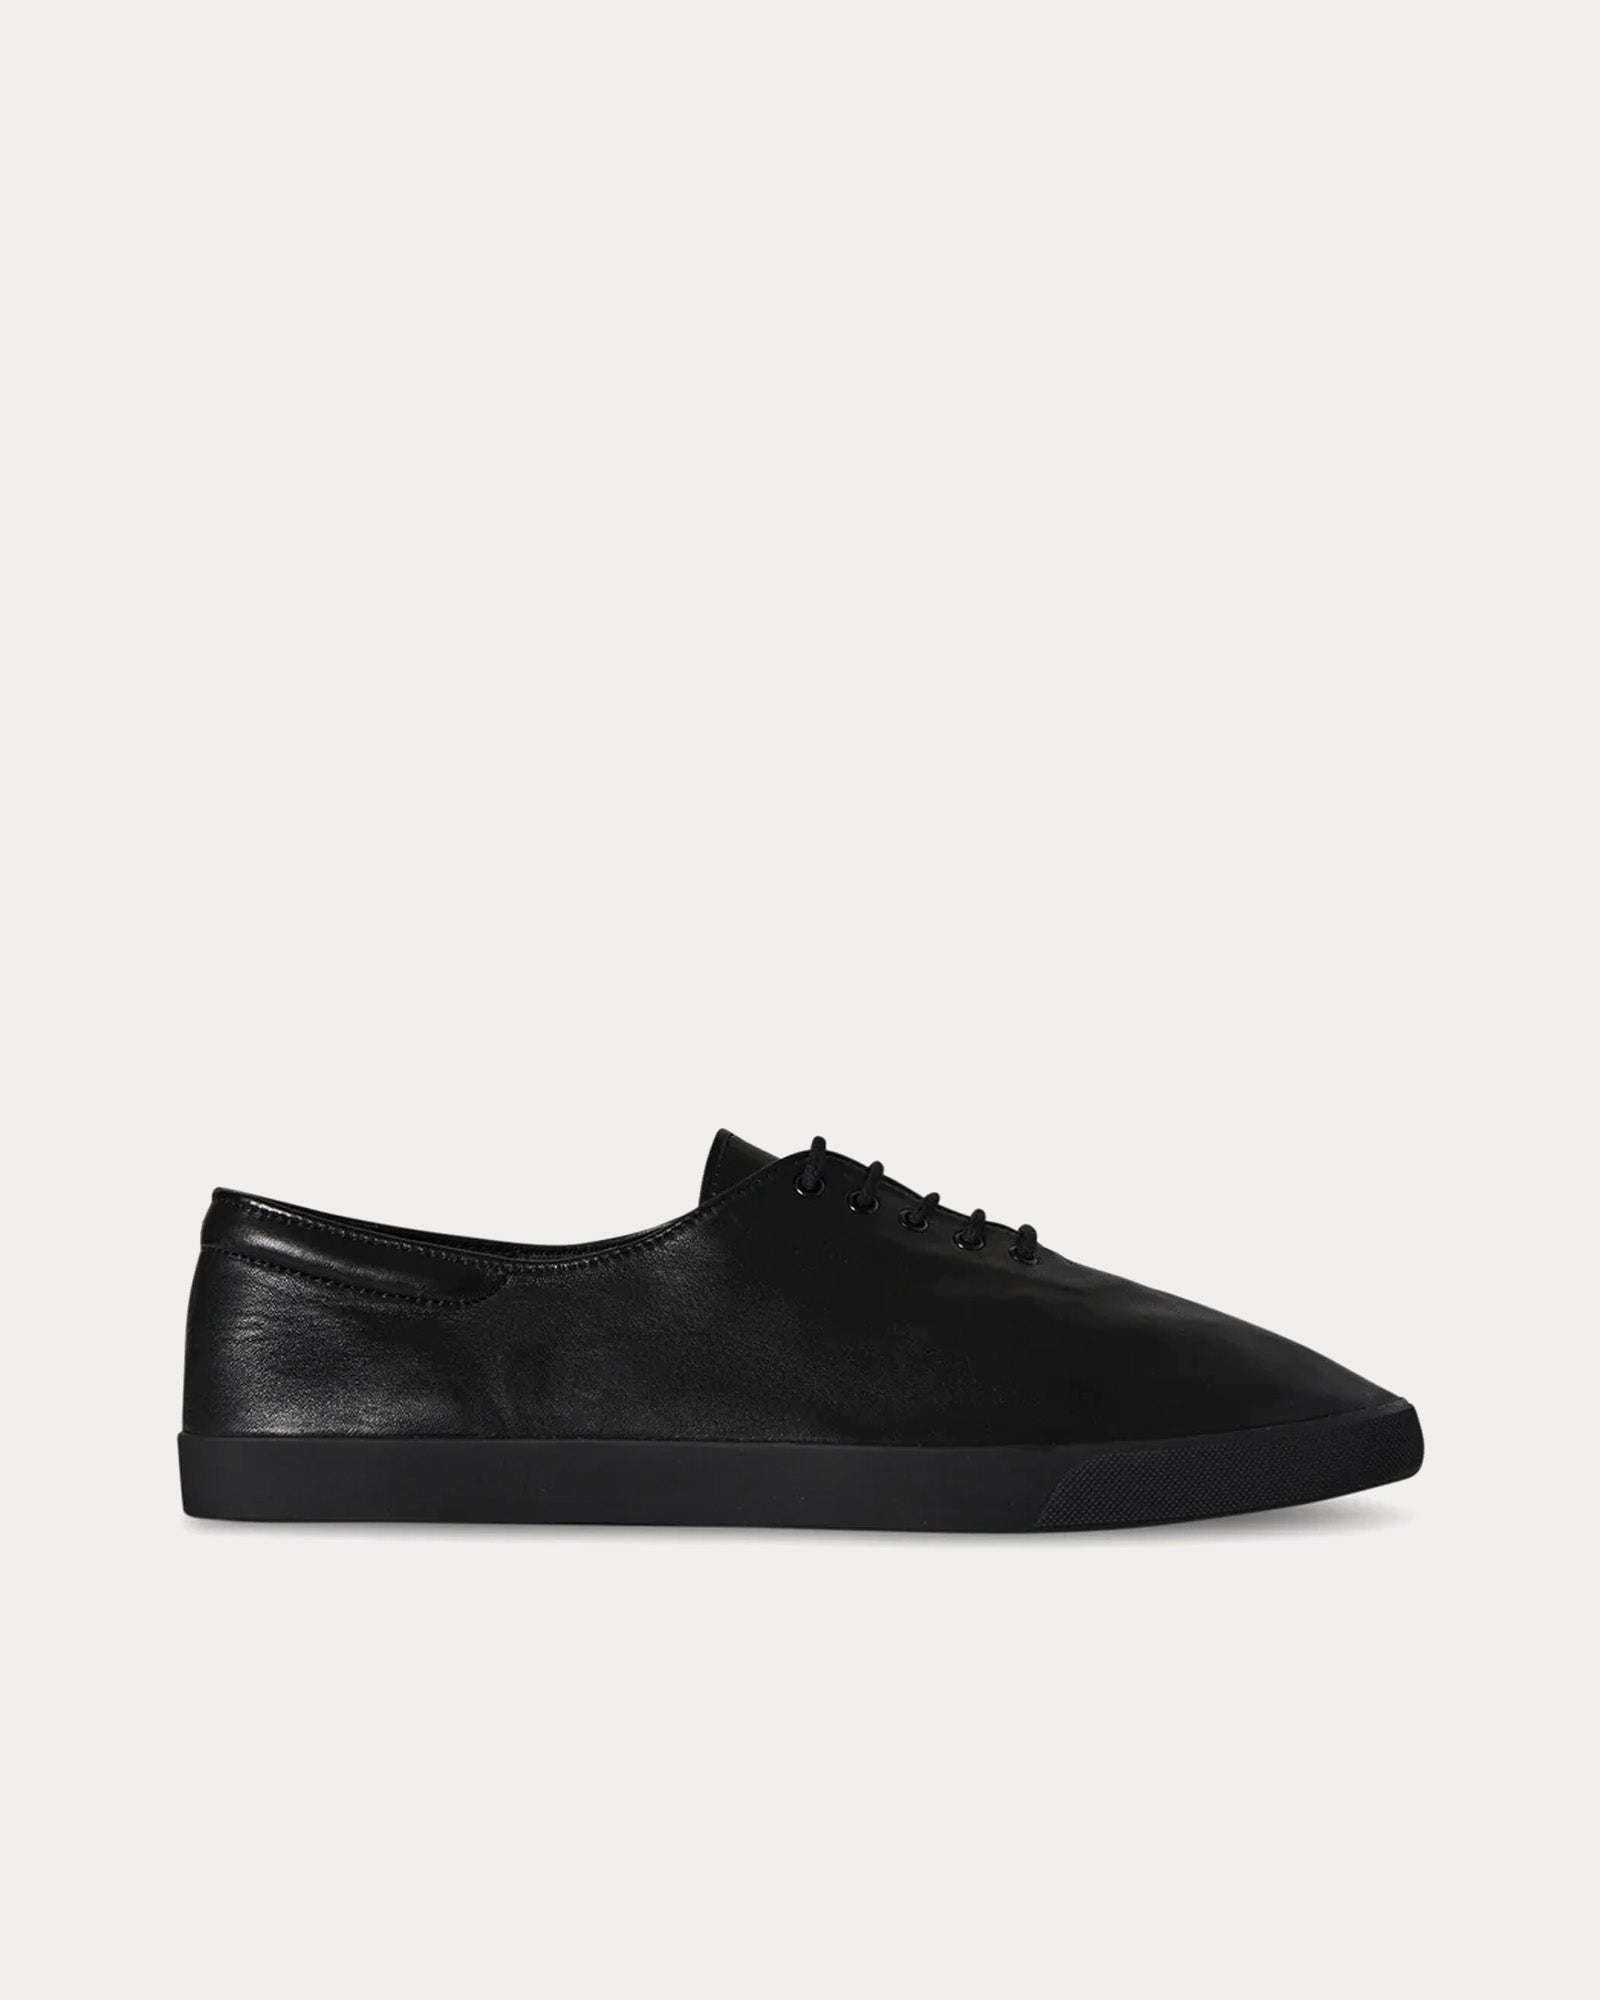 The Row - Sam Leather Black / Black Low Top Sneakers